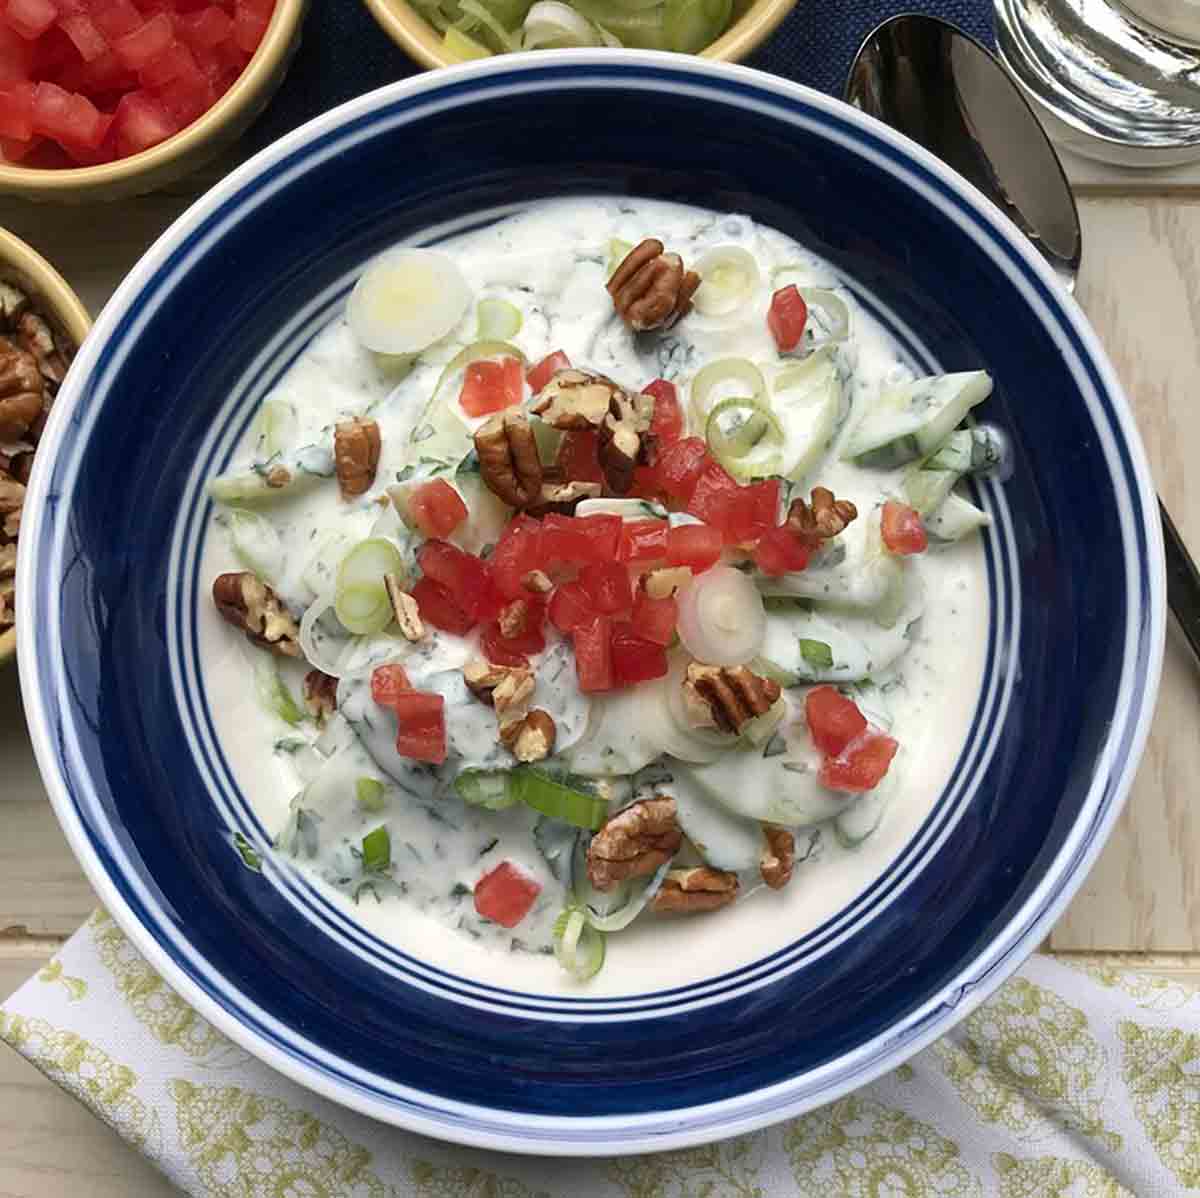 Chilled cucumber soup in a blue and white bowl, topped with red peppers, green onions, and chopped pecans.